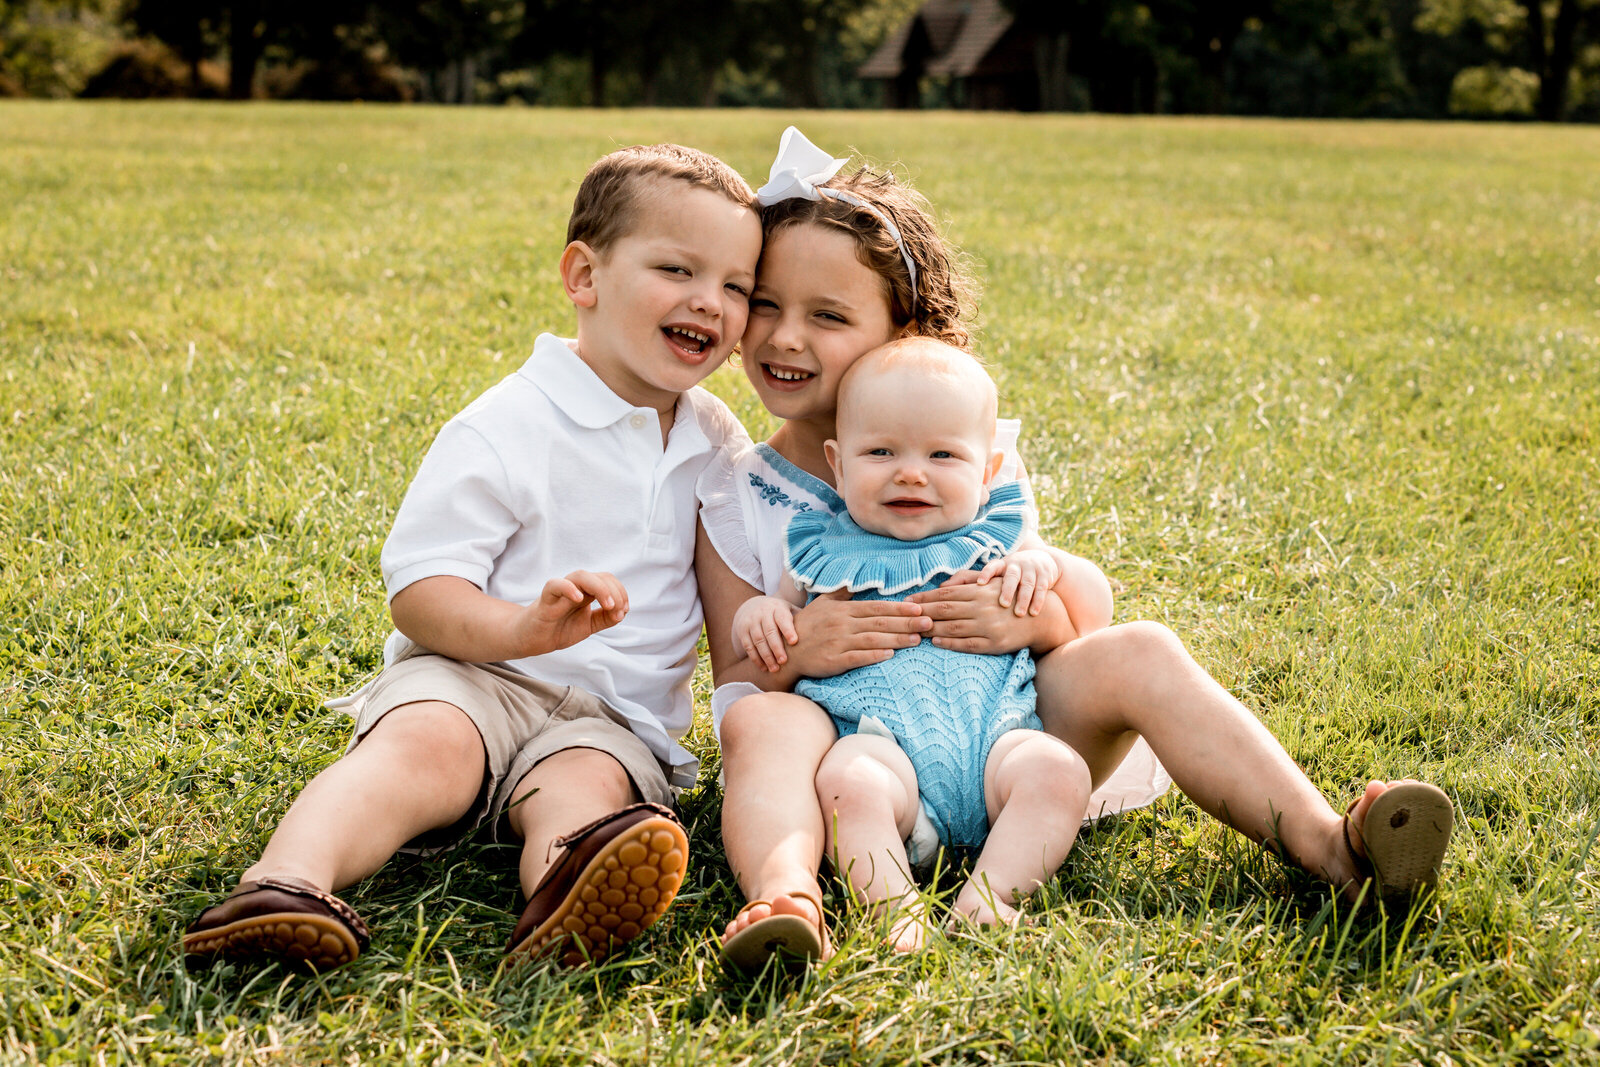 newcanaan-family-session-8